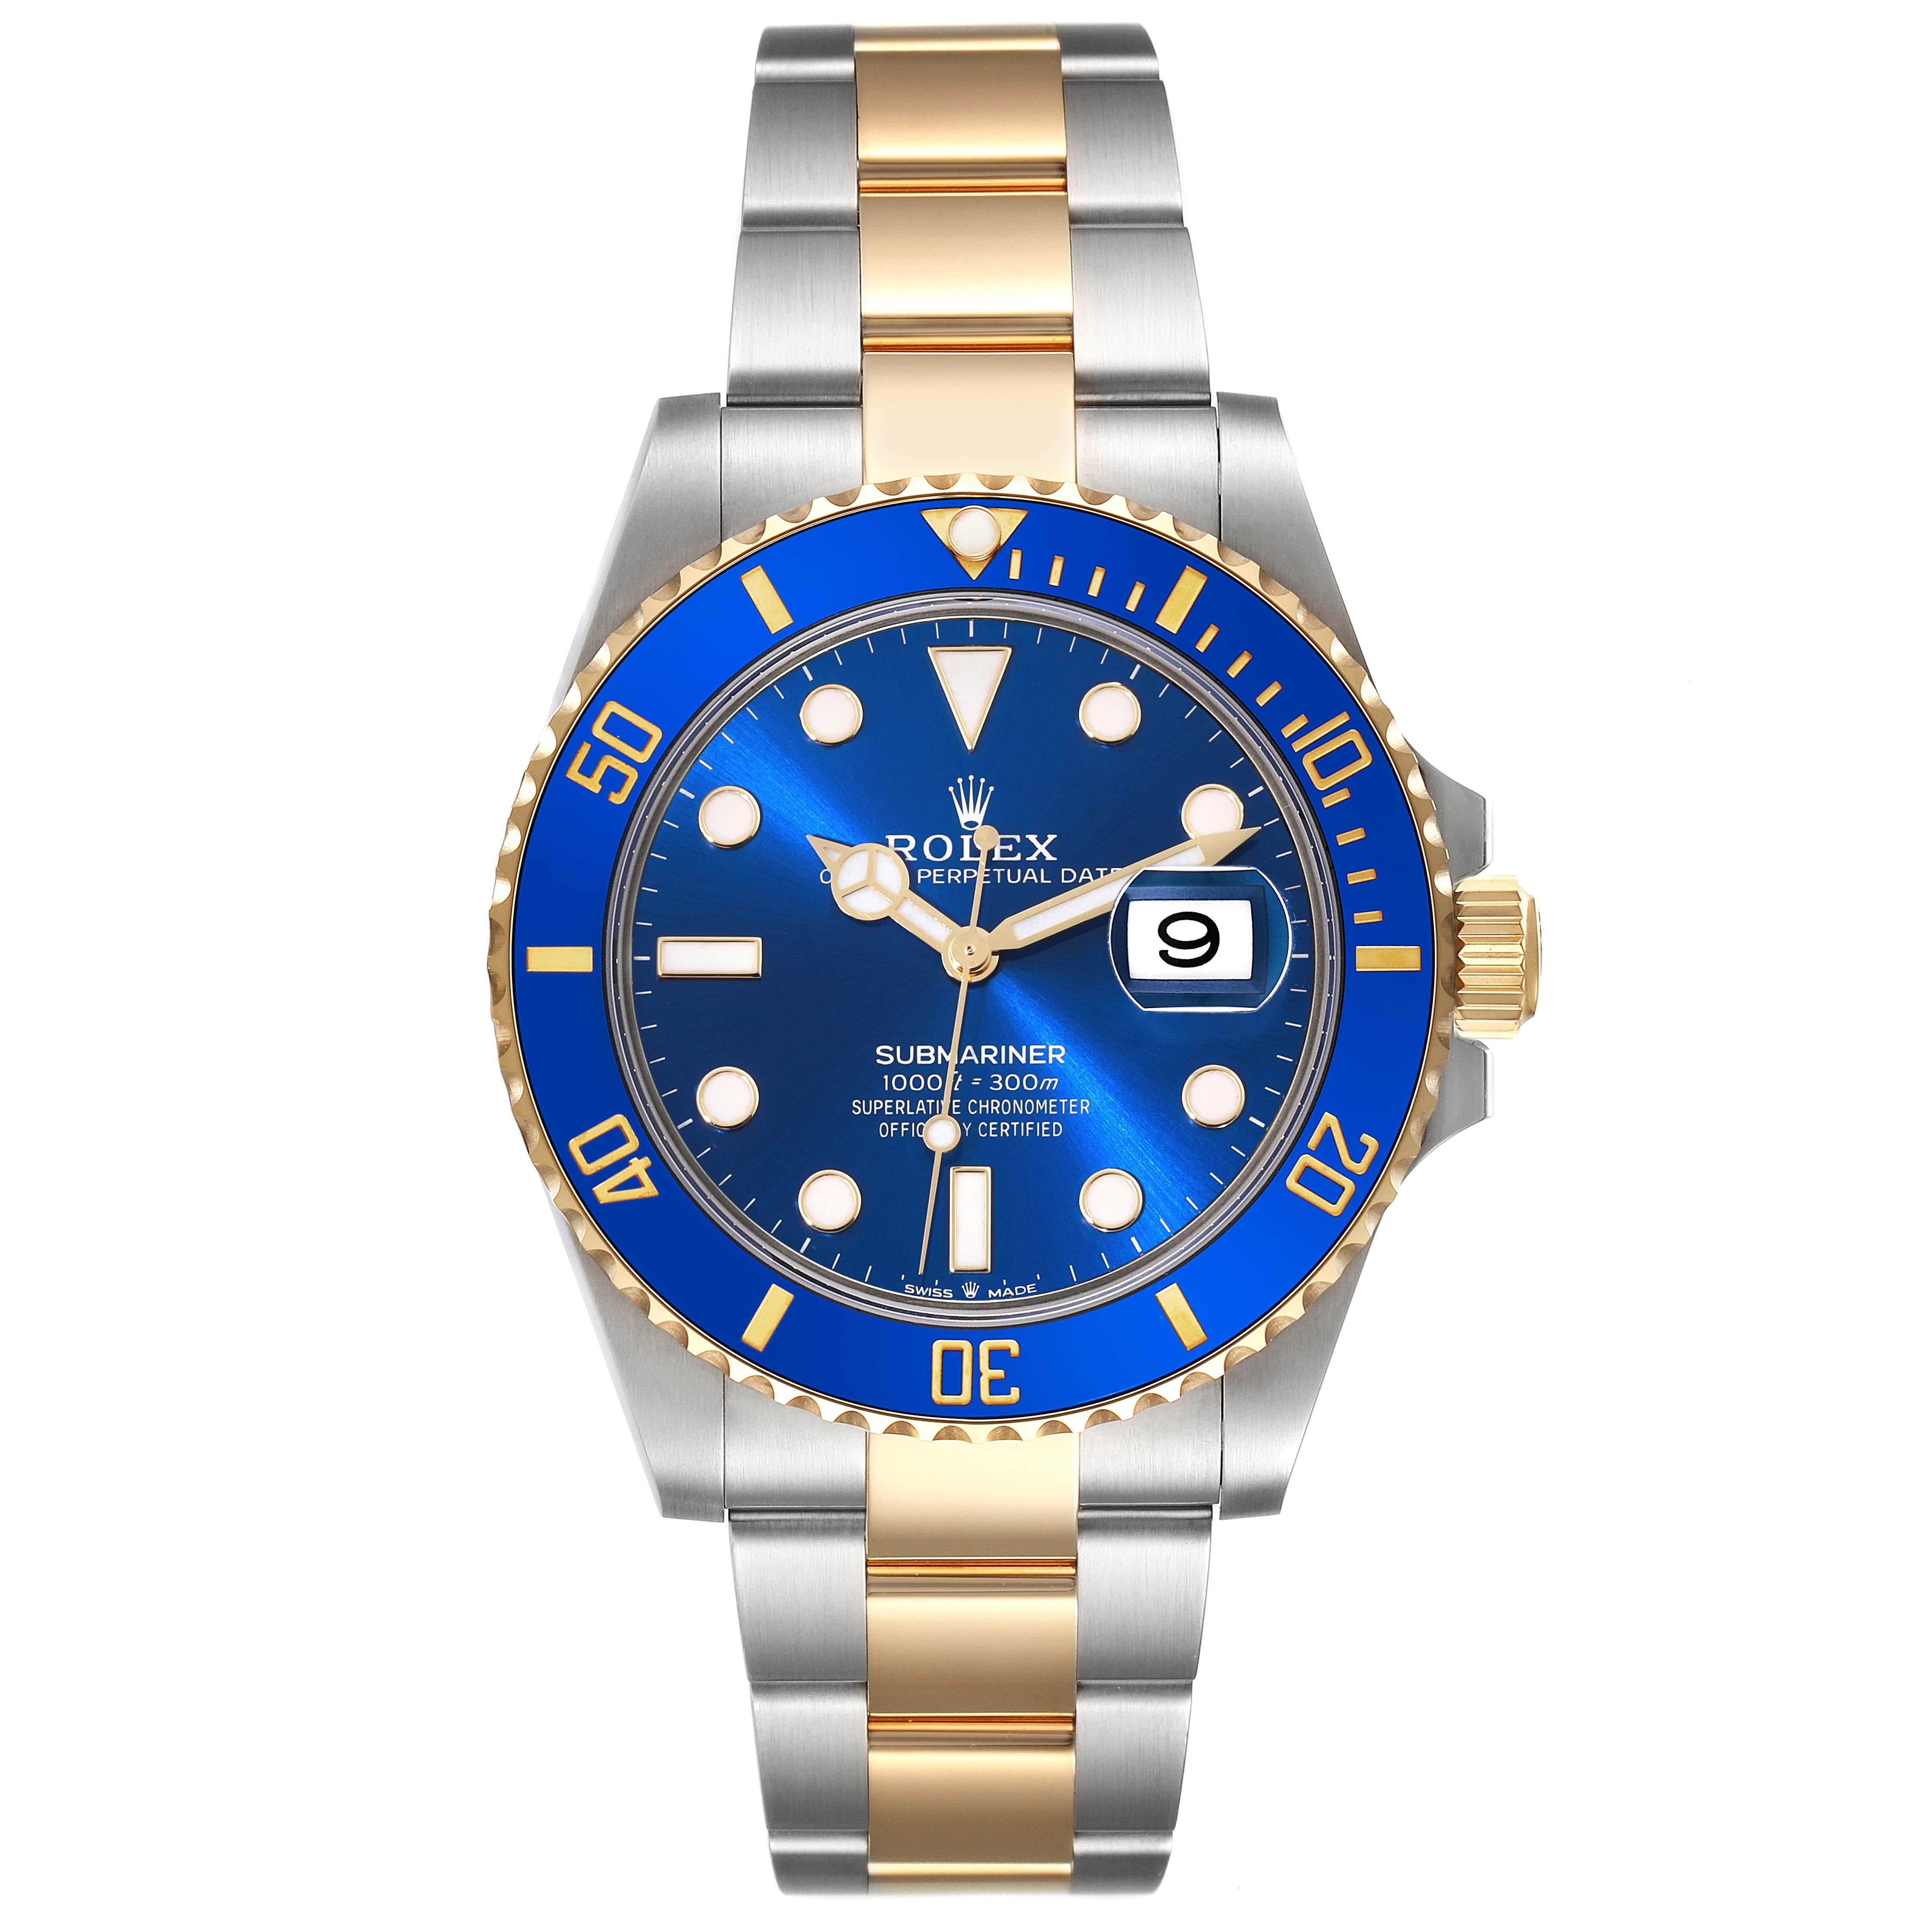 Rolex Submariner 41 Steel Yellow Gold Blue Dial Mens Watch 126613 Box Card. Officially certified chronometer automatic self-winding movement. Stainless steel and 18k yellow gold case 41 mm in diameter. Rolex logo on the crown. Ceramic blue